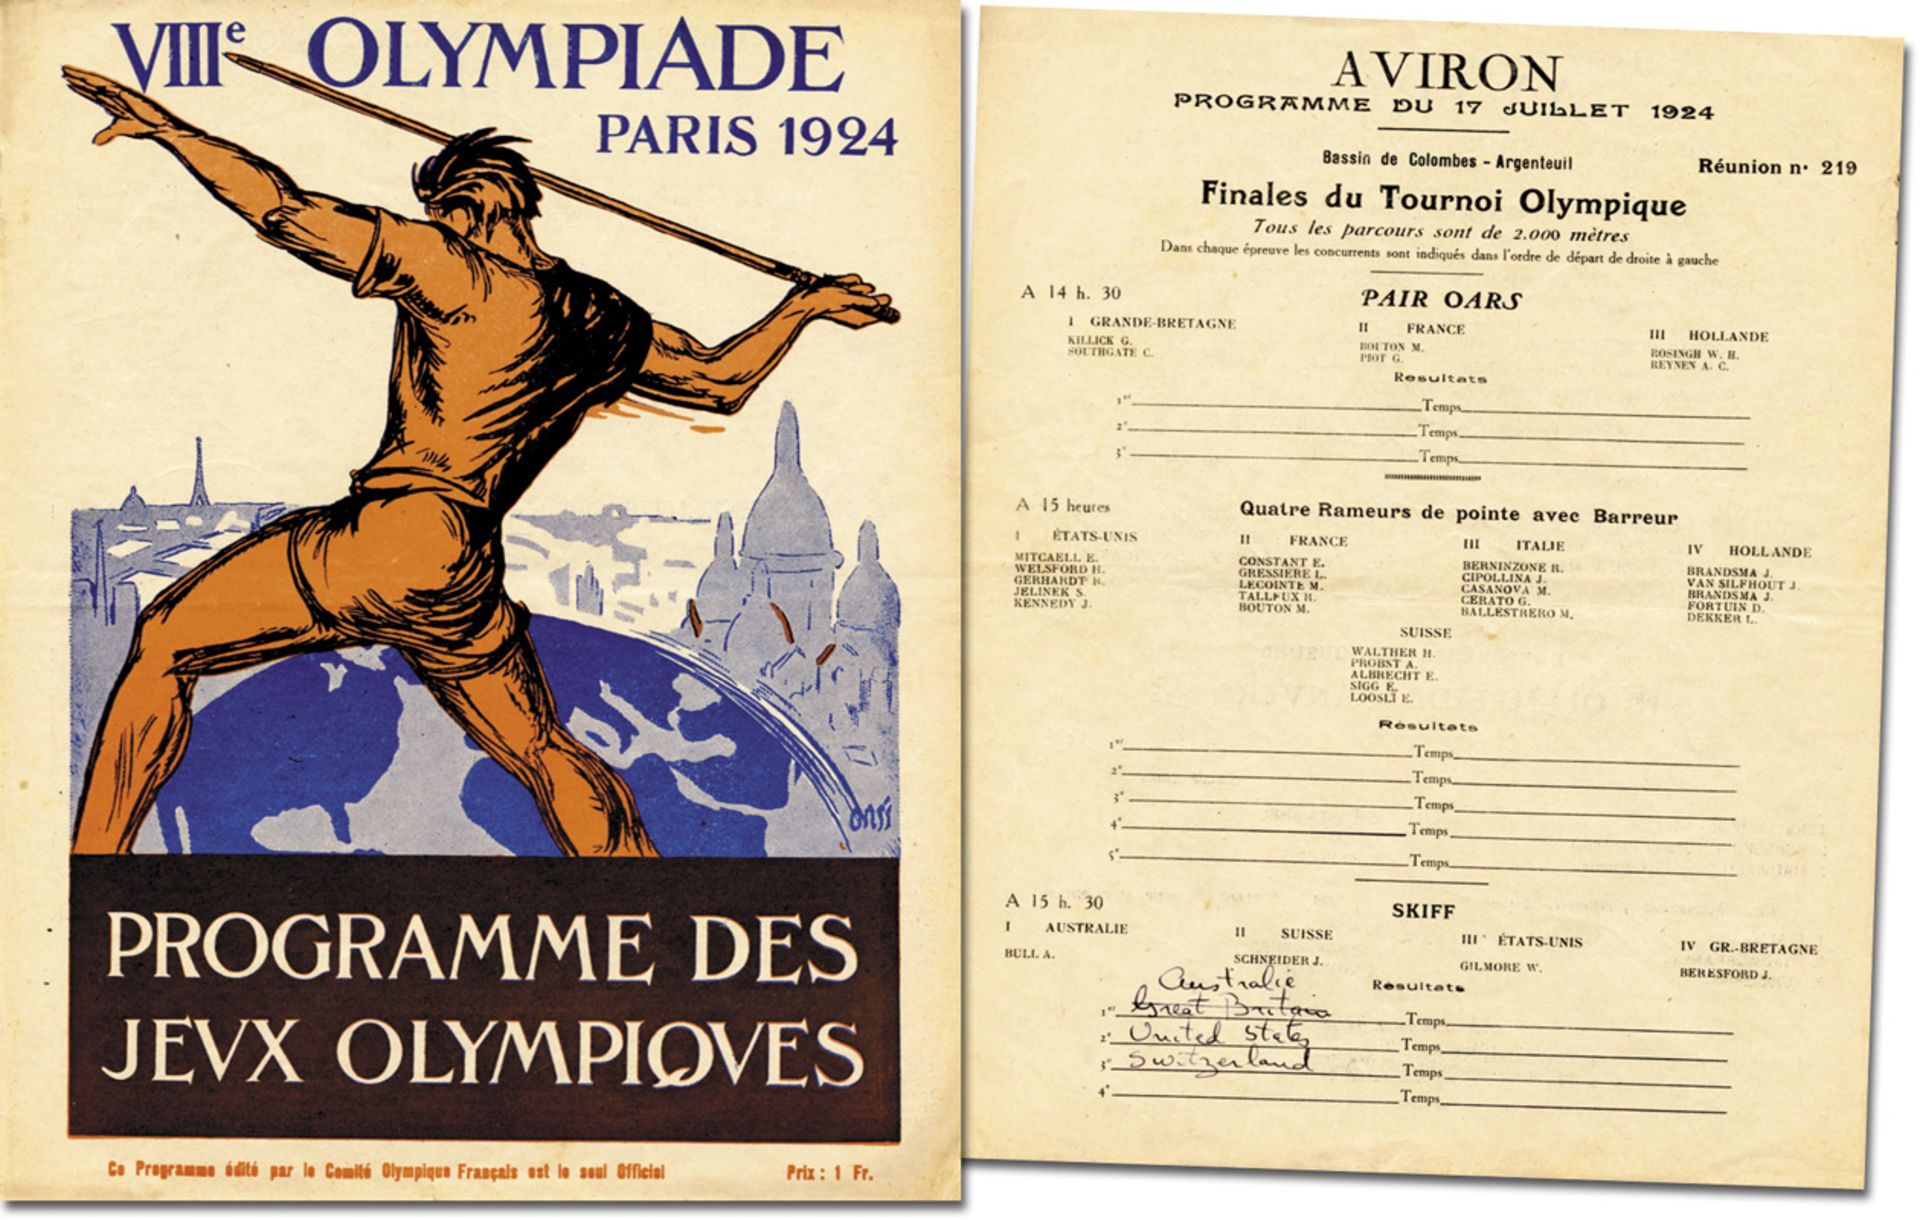 Olympic Games Paris 1924 Official Programm Rowing - Official daily programme VIIIth Olympiade Paris 